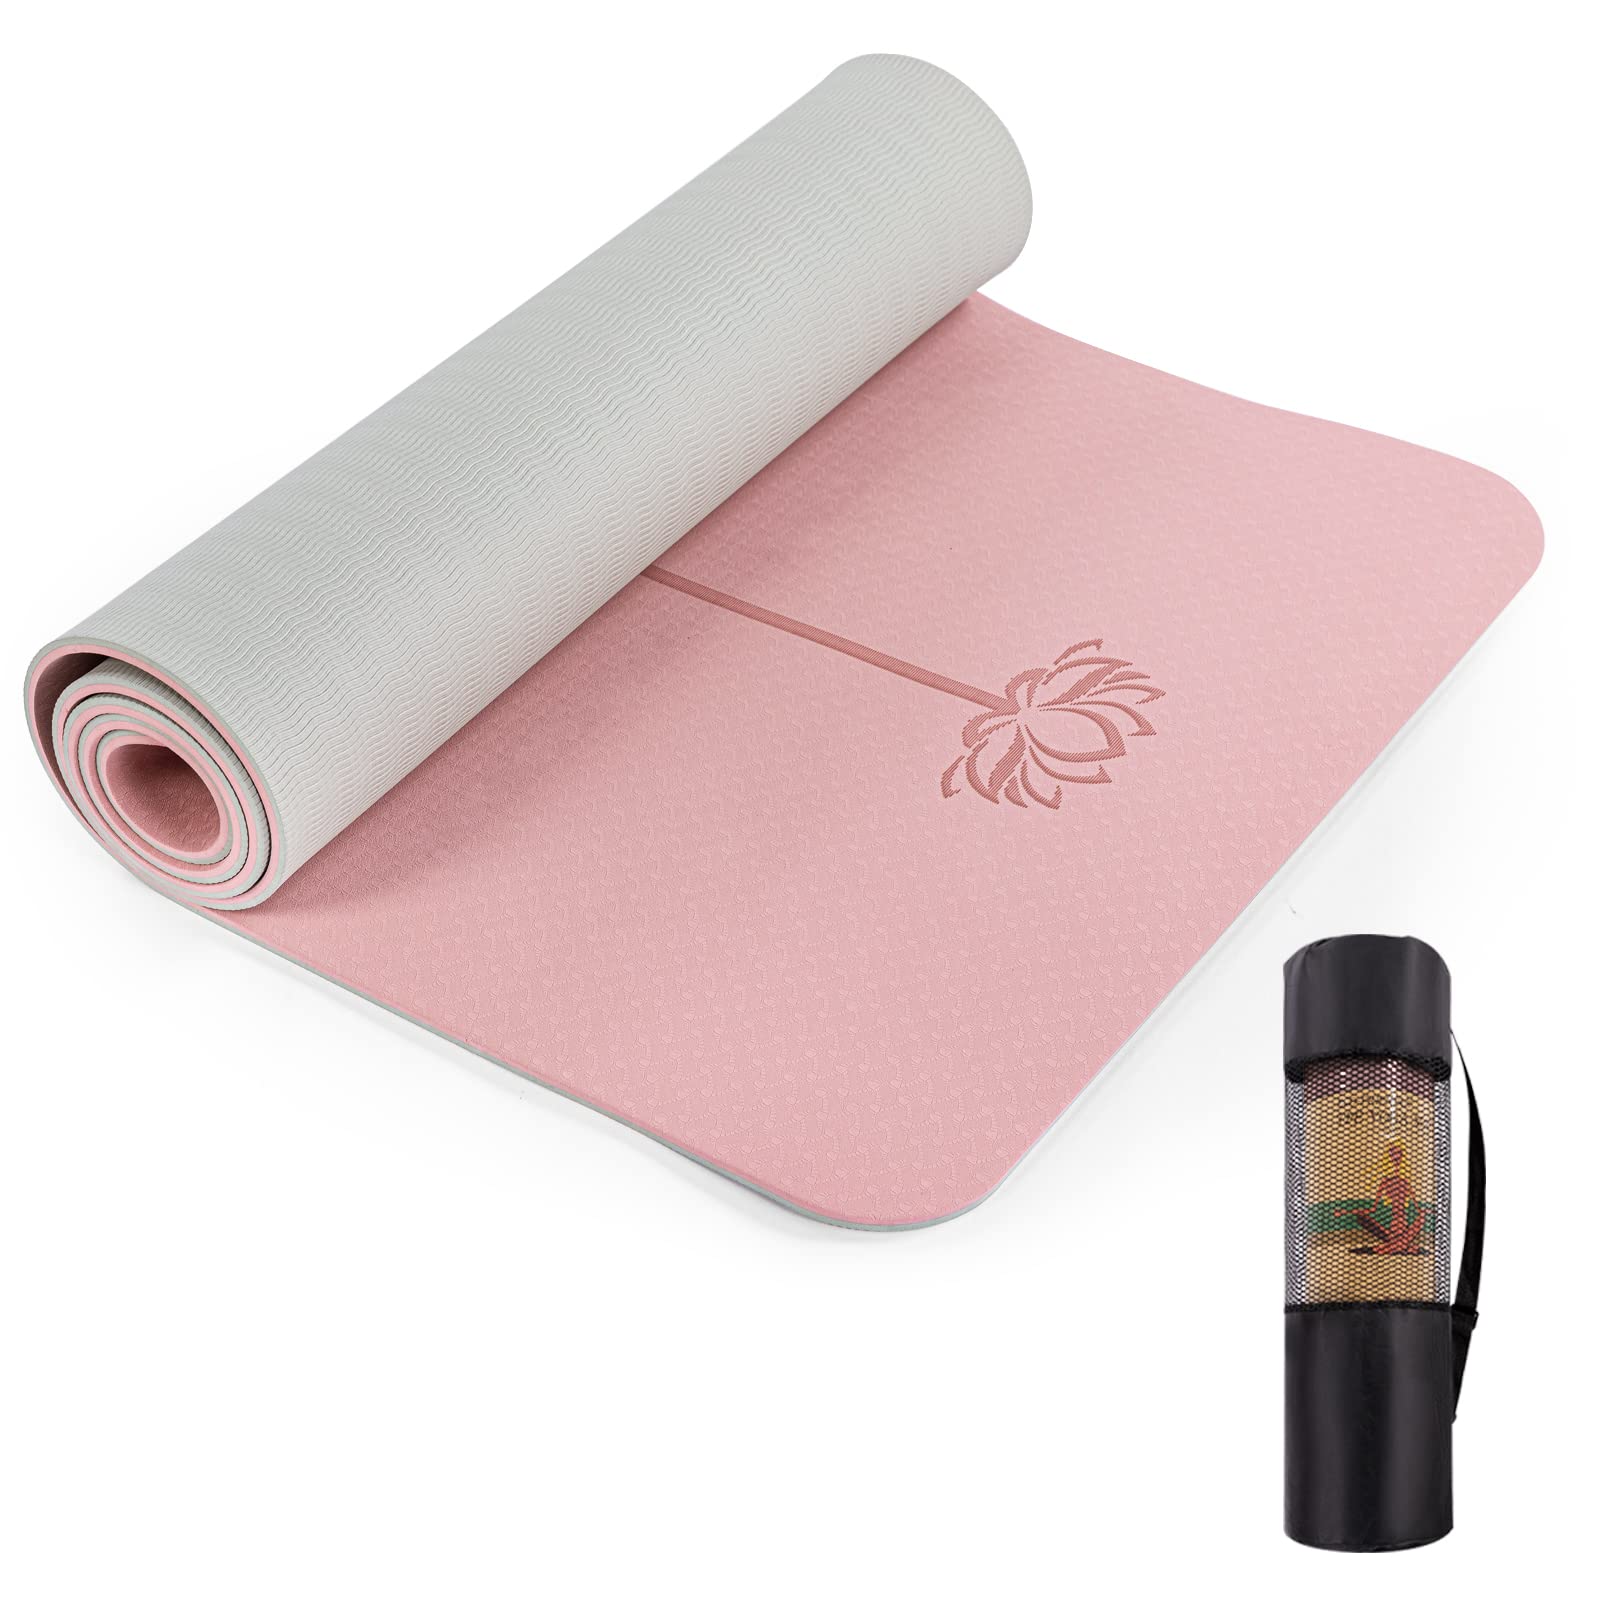 Yoga mat 72 X 24 - Extra Thick Exercise Mat - with Carrying